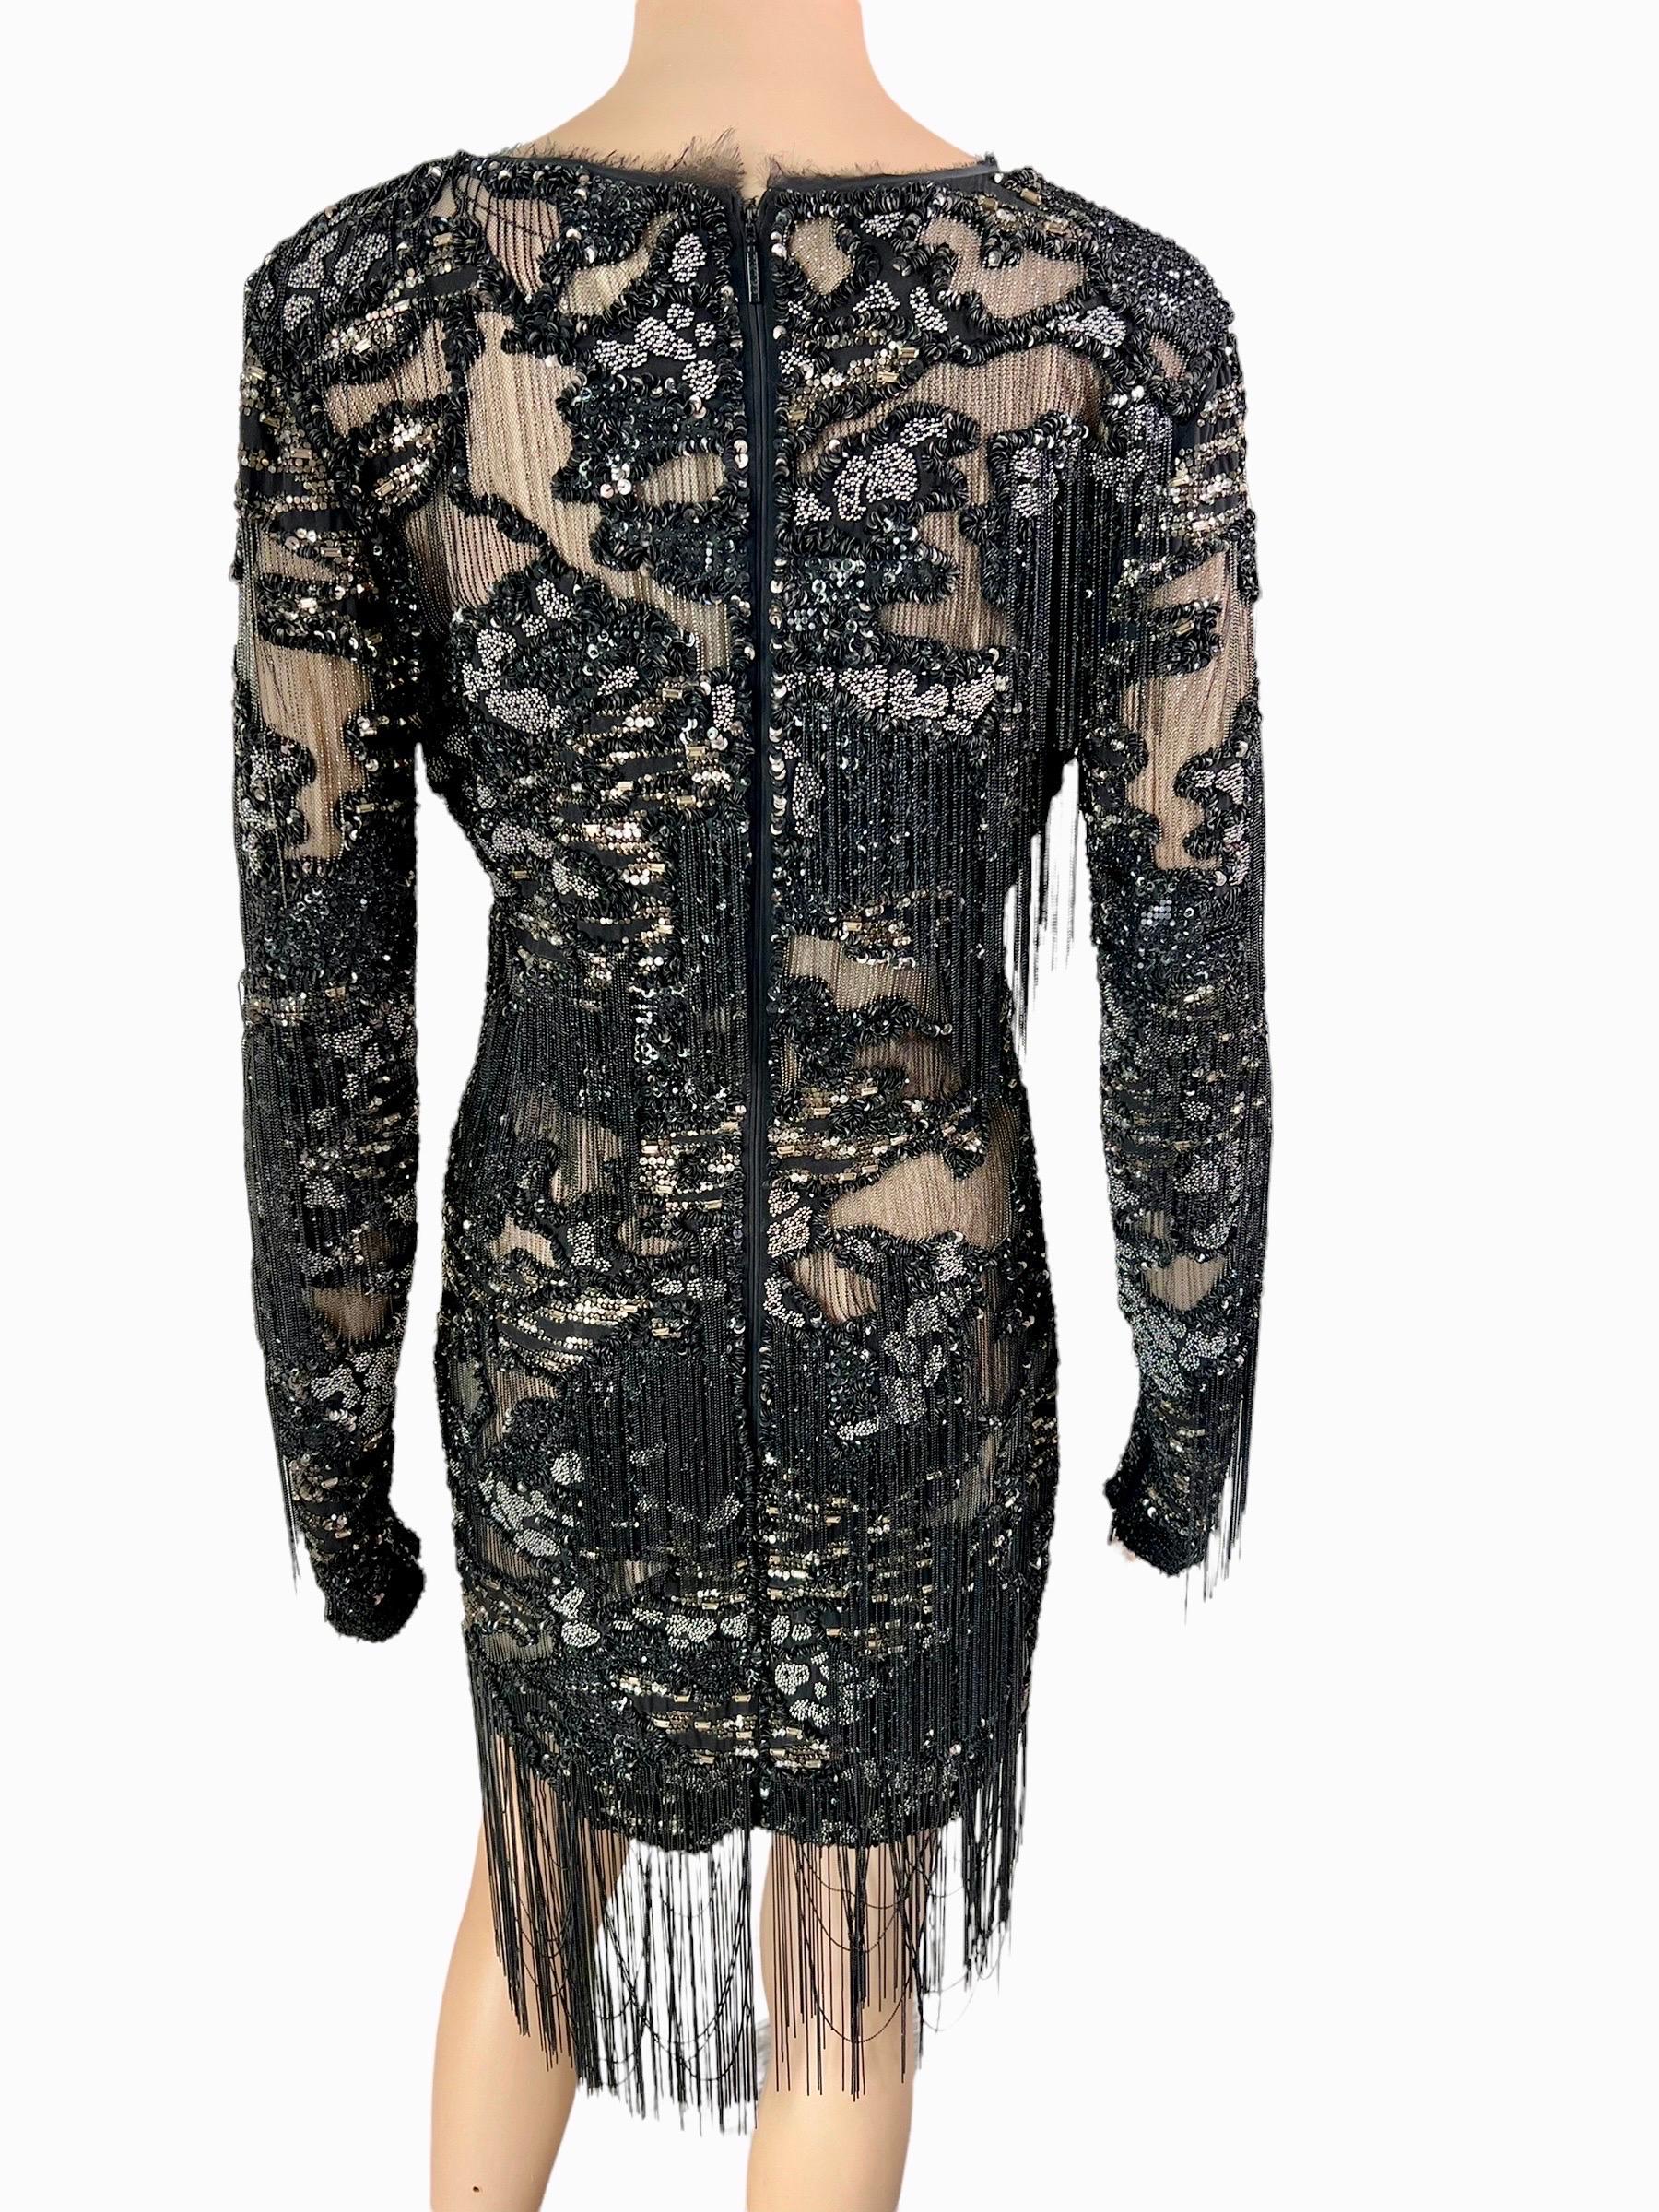 Roberto Cavalli S/S 2016 Runway Embellished Chain Sheer Black Mini Evening Dress In New Condition For Sale In Naples, FL